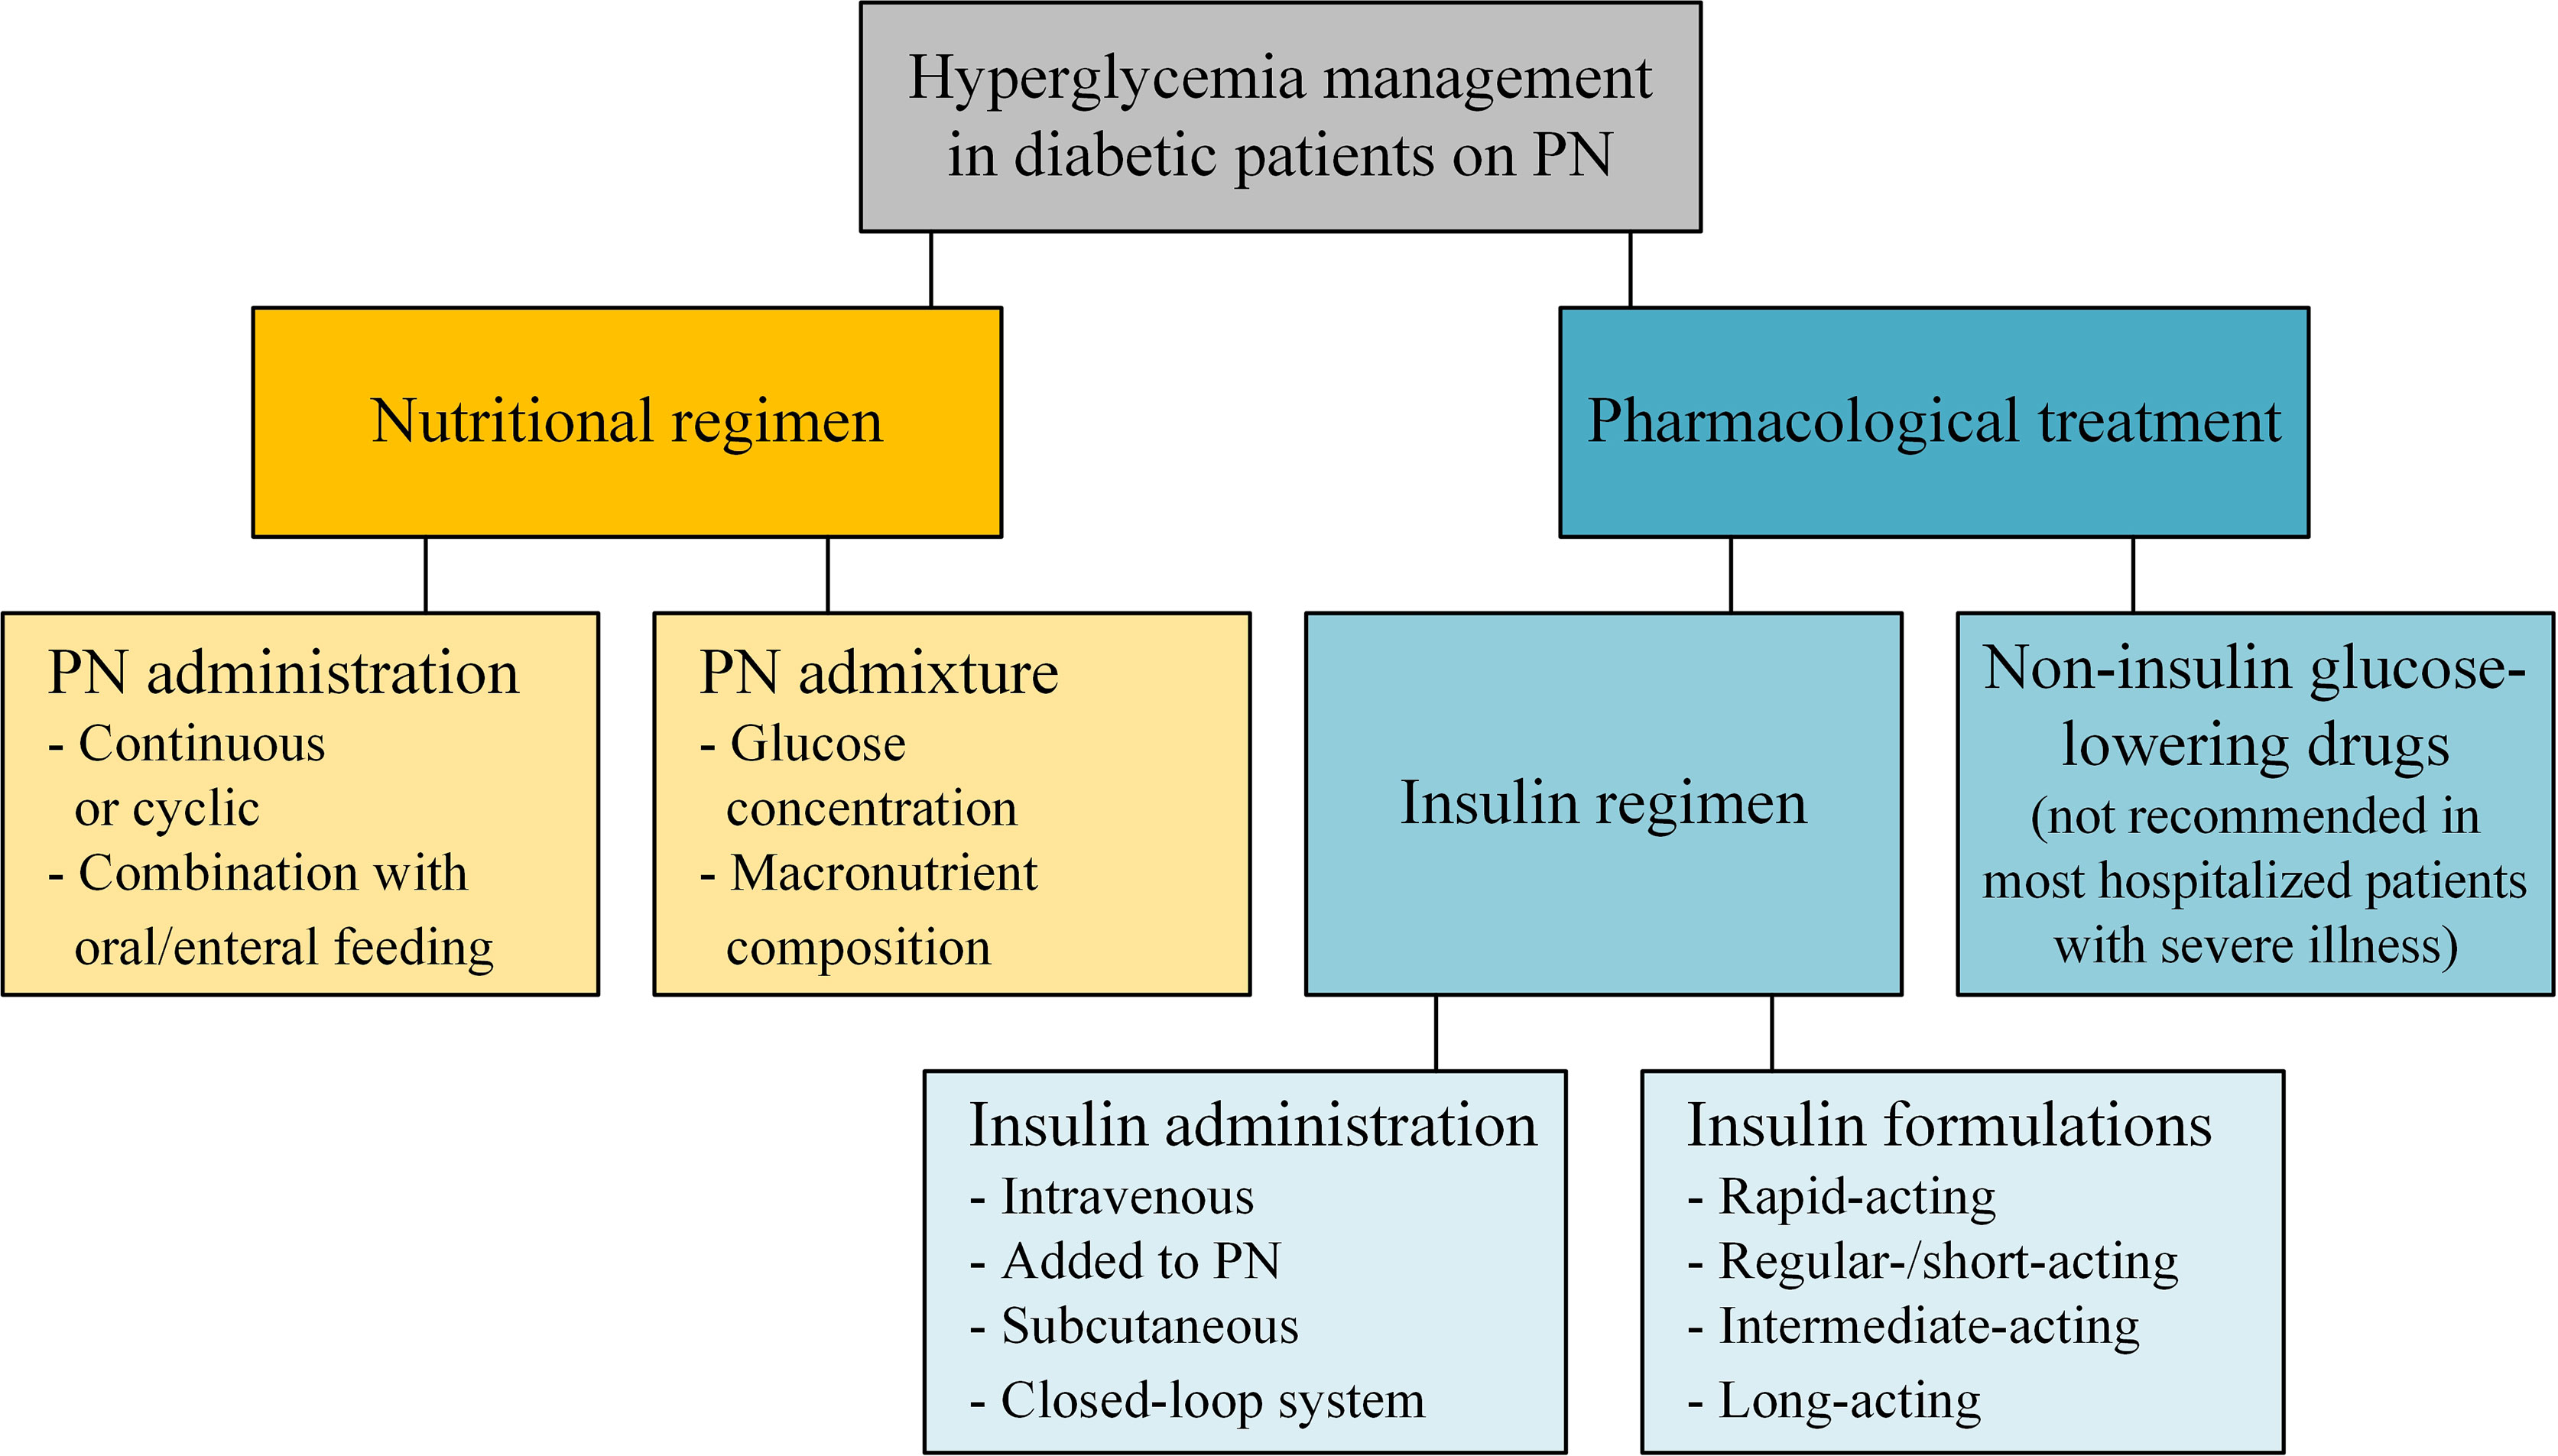 Type 1 diabetes glycemic management: Insulin therapy, glucose